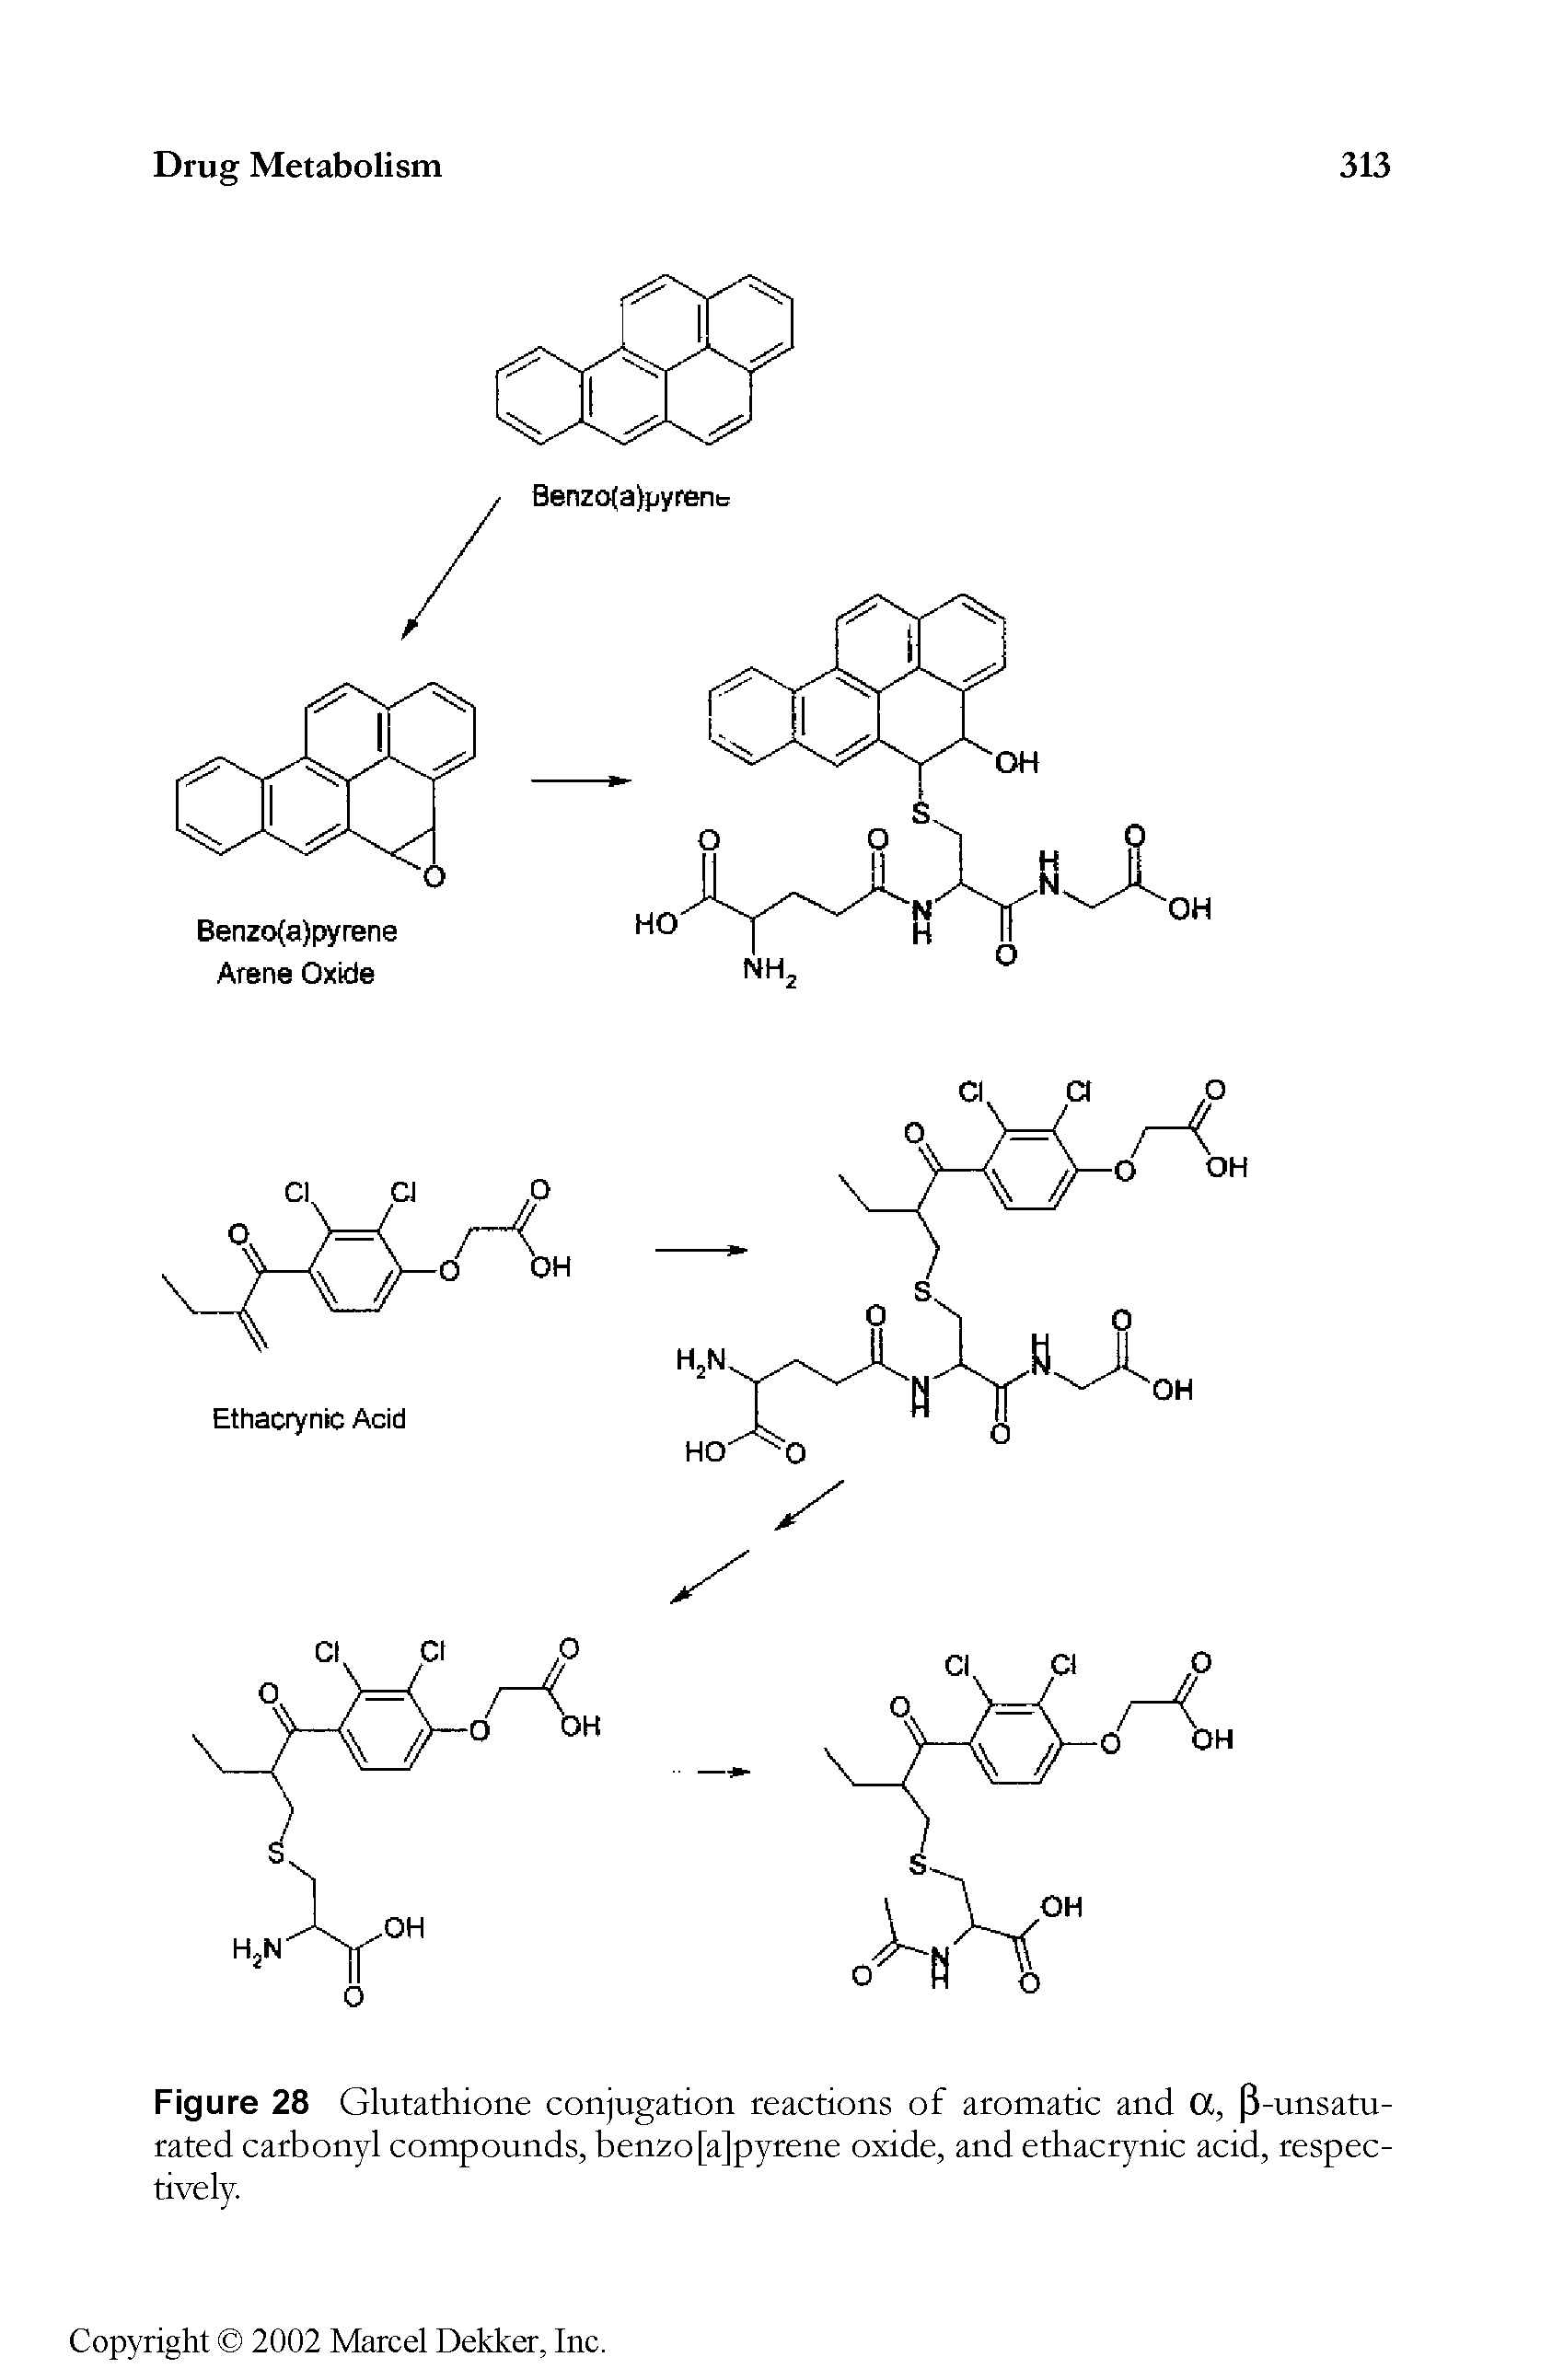 Figure 28 Glutathione conjugation reactions of aromatic and OC, P-unsatu-rated carbonyl compounds, benzo[a]pyrene oxide, and ethacrynic acid, respectively.